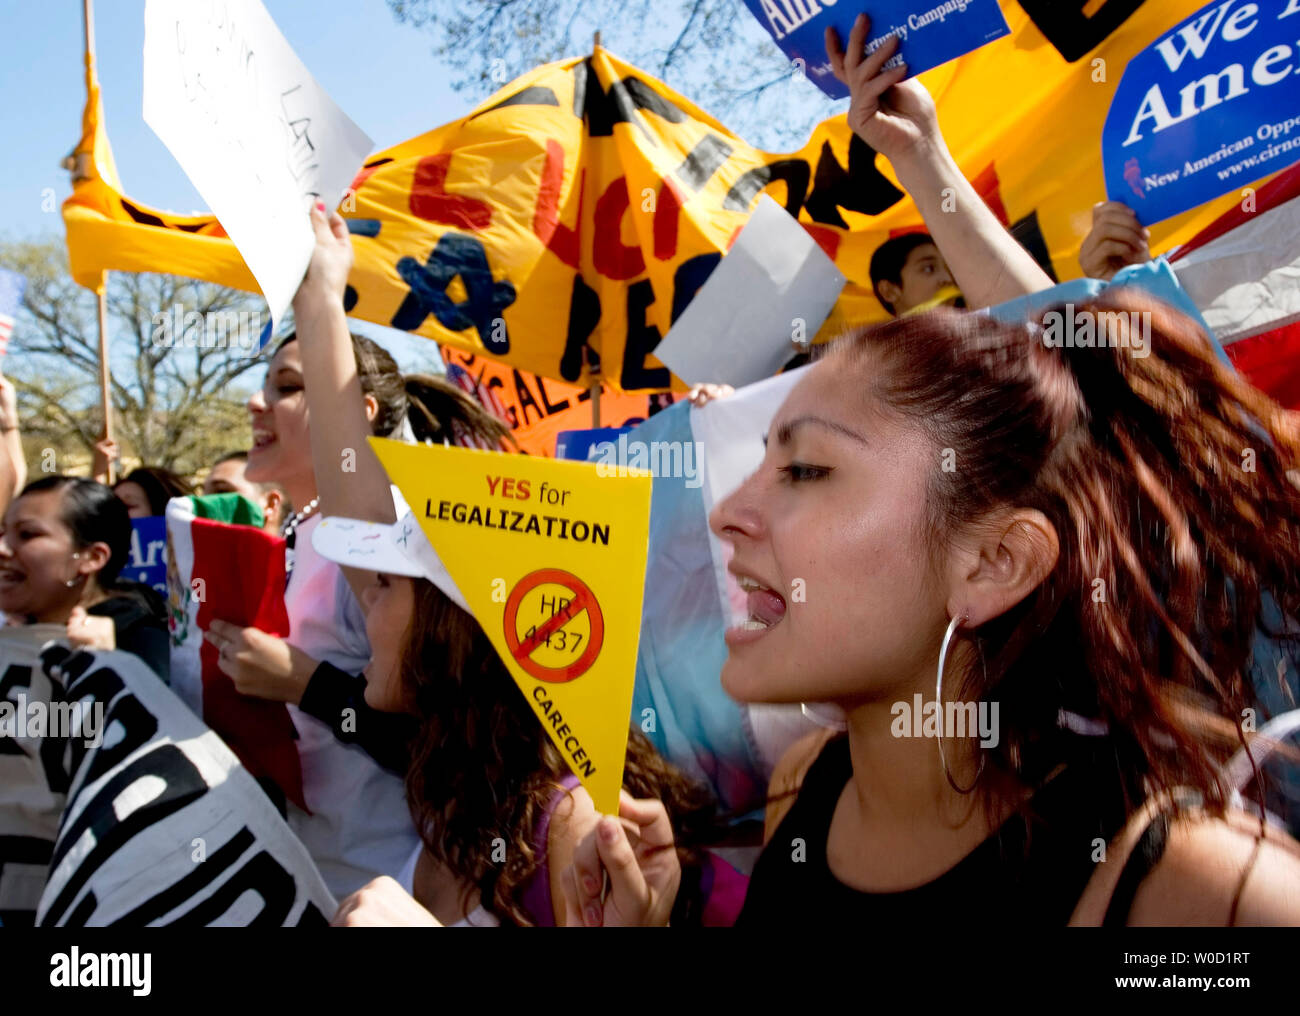 Estefani Pierola, 15, of Annandale, Va., cheers, "USA, USA" before the start of the march at Meridian Hill Park in Washington on April 10, 2006.  Tens of thousands of immigrants and their supporters rallied today against a House bill that would criminalize illegal immigrants and for reform measures that would protect their rights.  (UPI Photo/Chris Rossi) Stock Photo